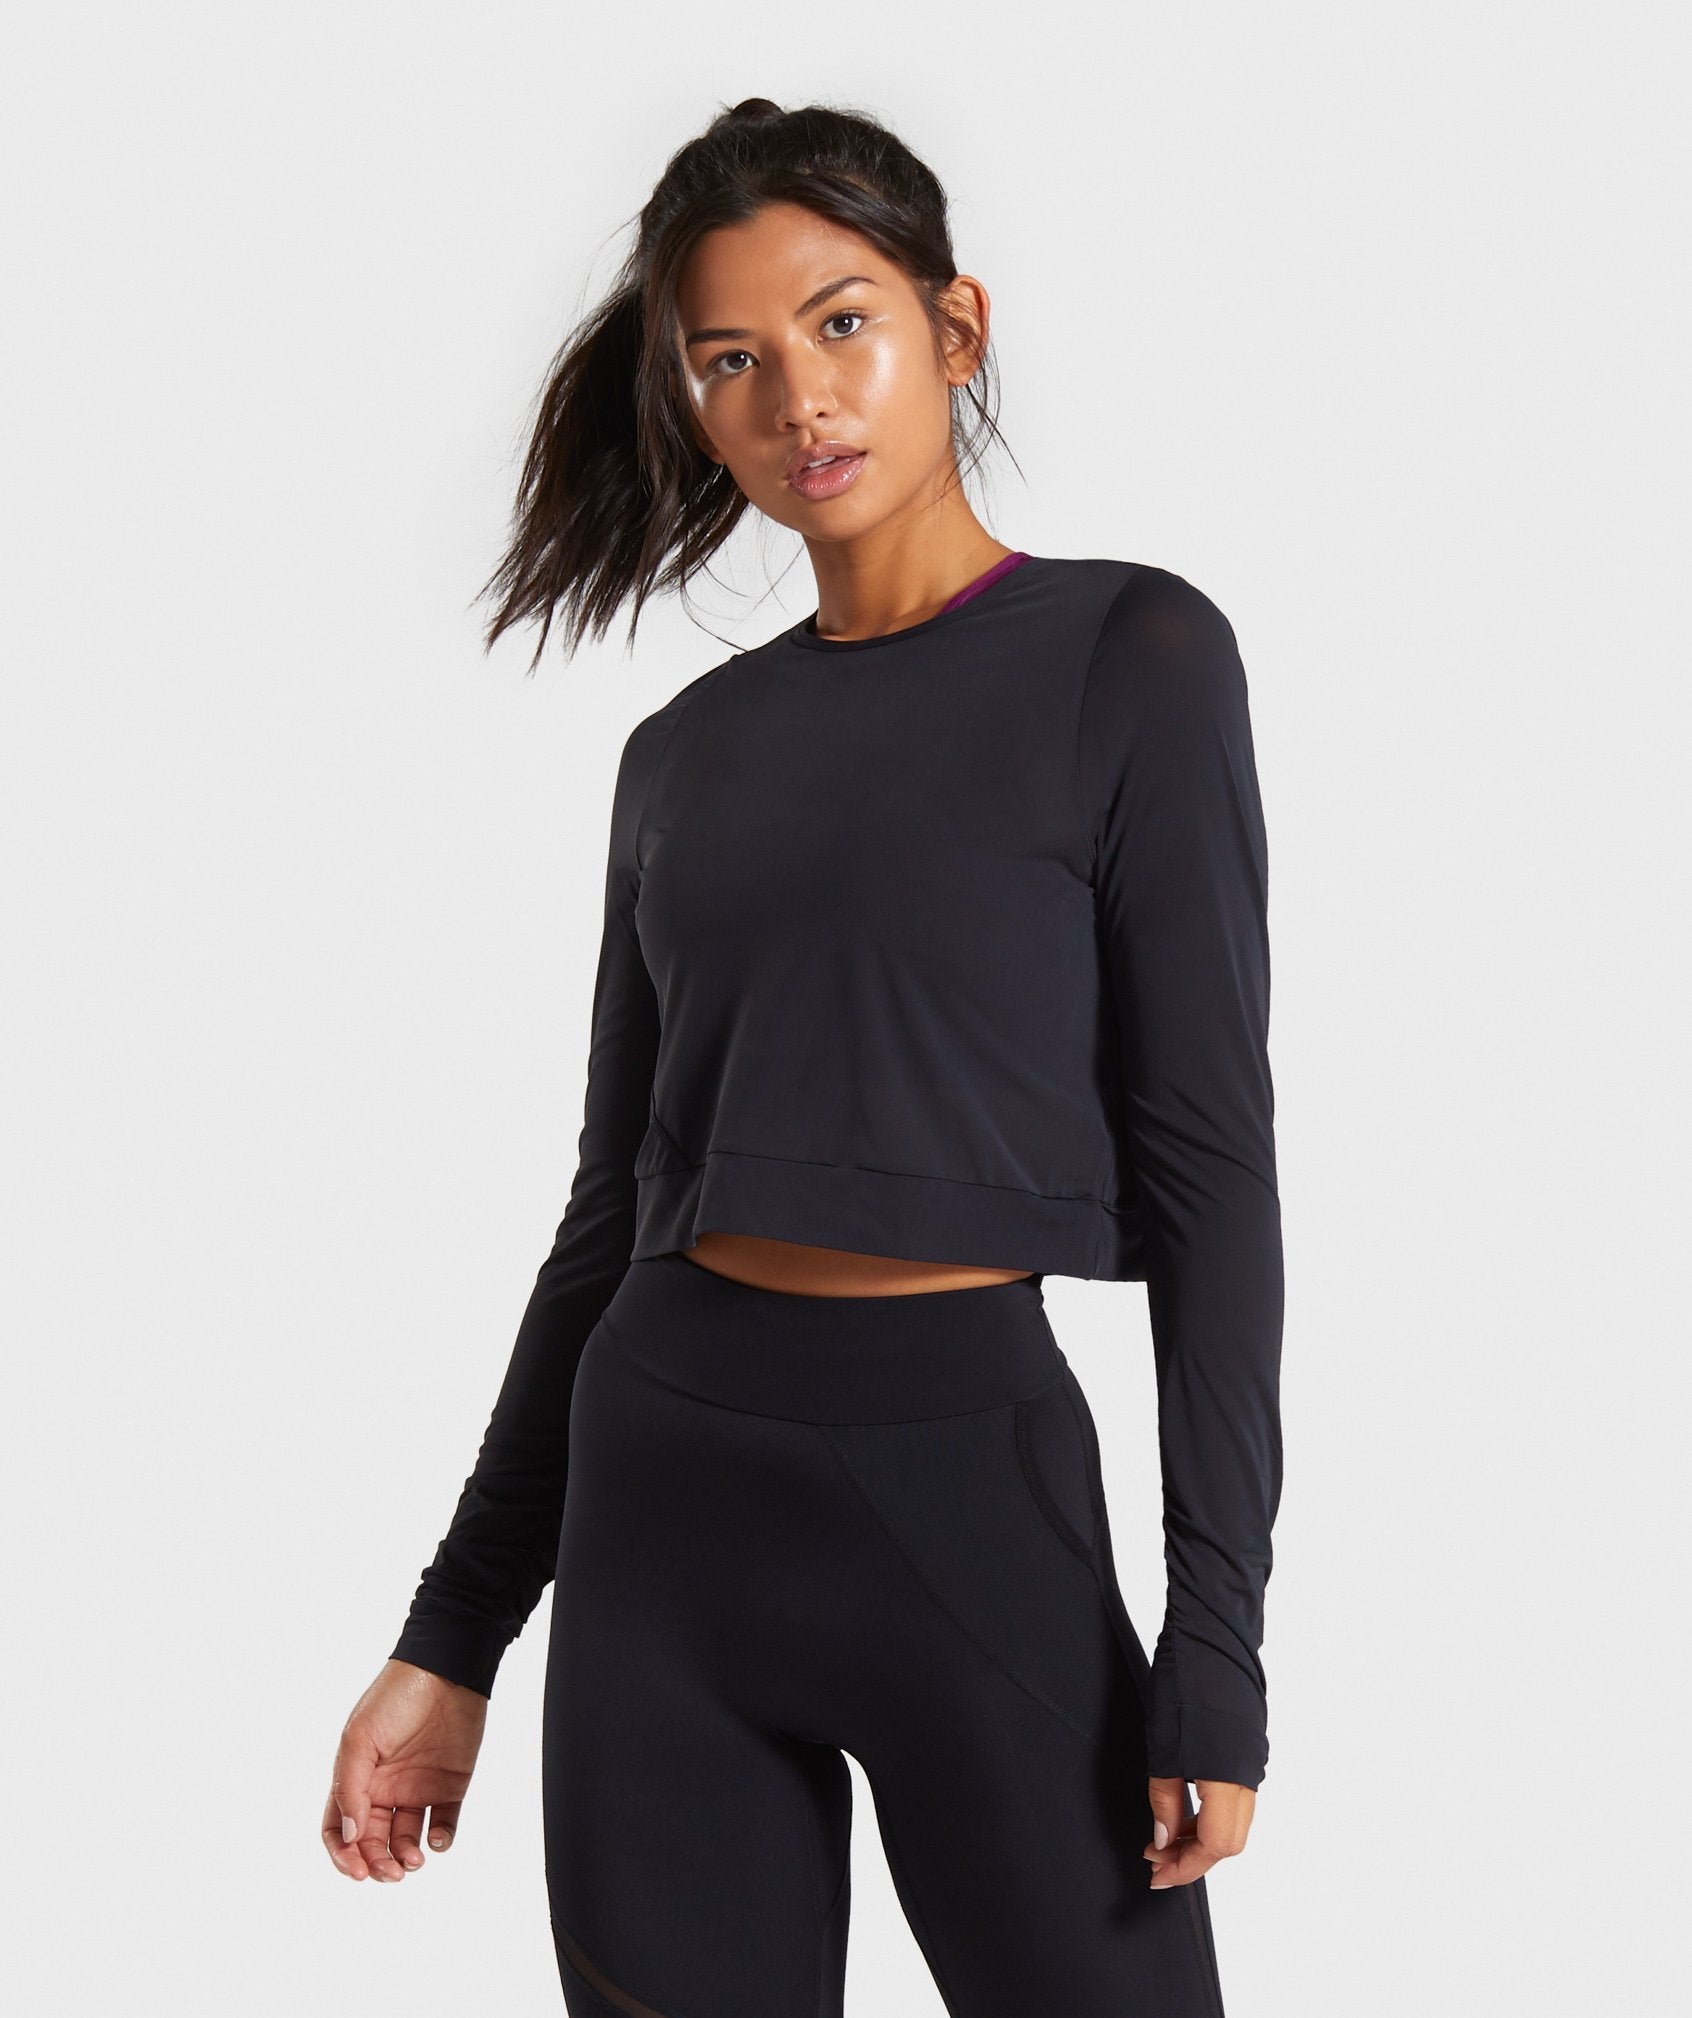 Mesh Layer Long Sleeve Top in Black - view 1